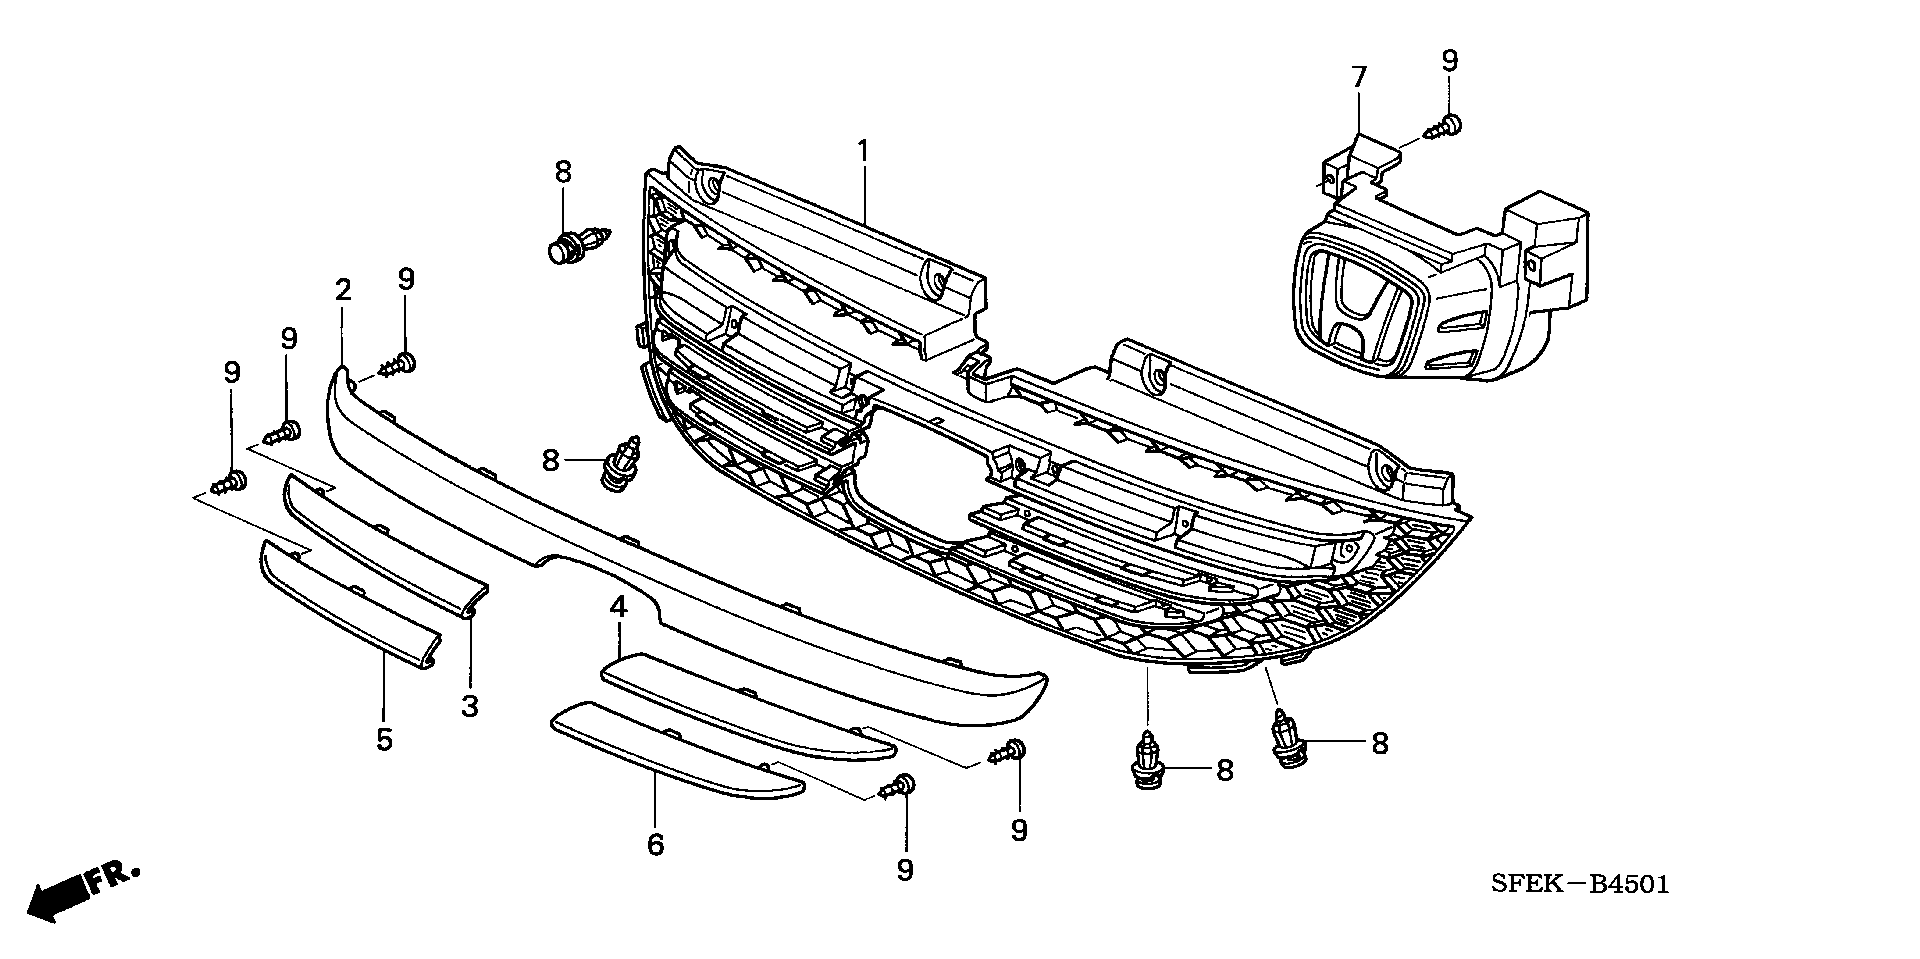 FRONT GRILLE(2)